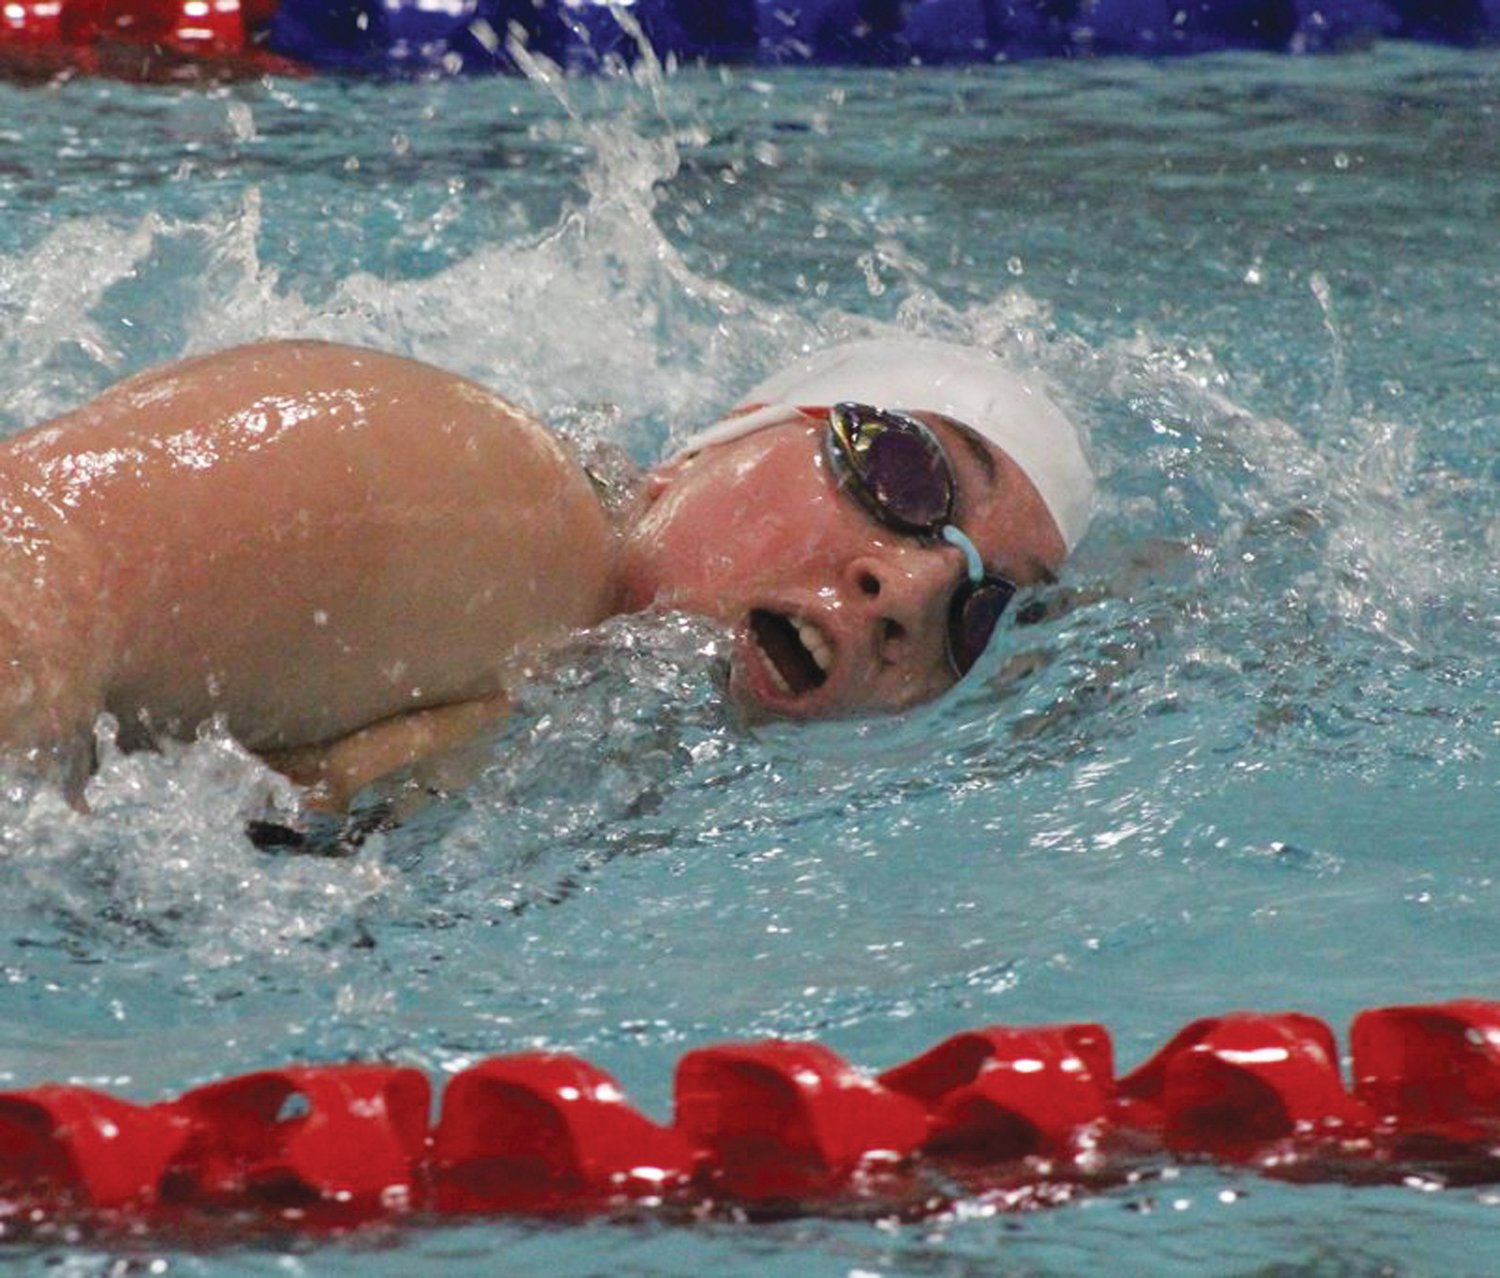 MAKING A SPLASH: Pilgrim
senior Kaylee Collins
competes against Mount
St. Charles last week at the
Woonsocket YMCA.
Collins finished her final
season strong, taking second
place in both the 200
and 500 yard freestyle
events for the Pats.